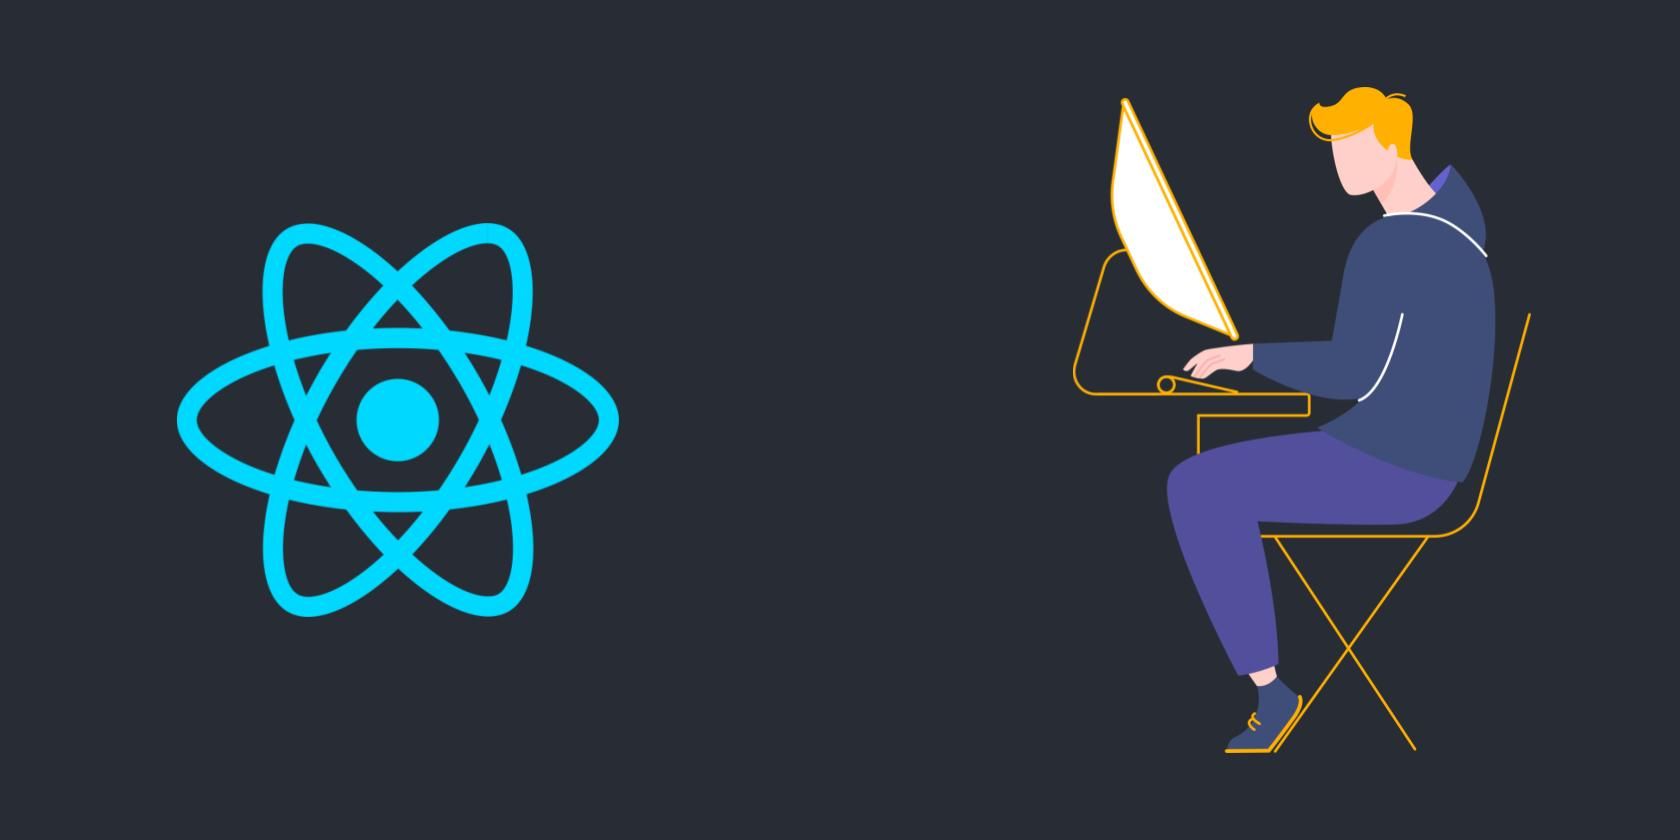 Create your first react app